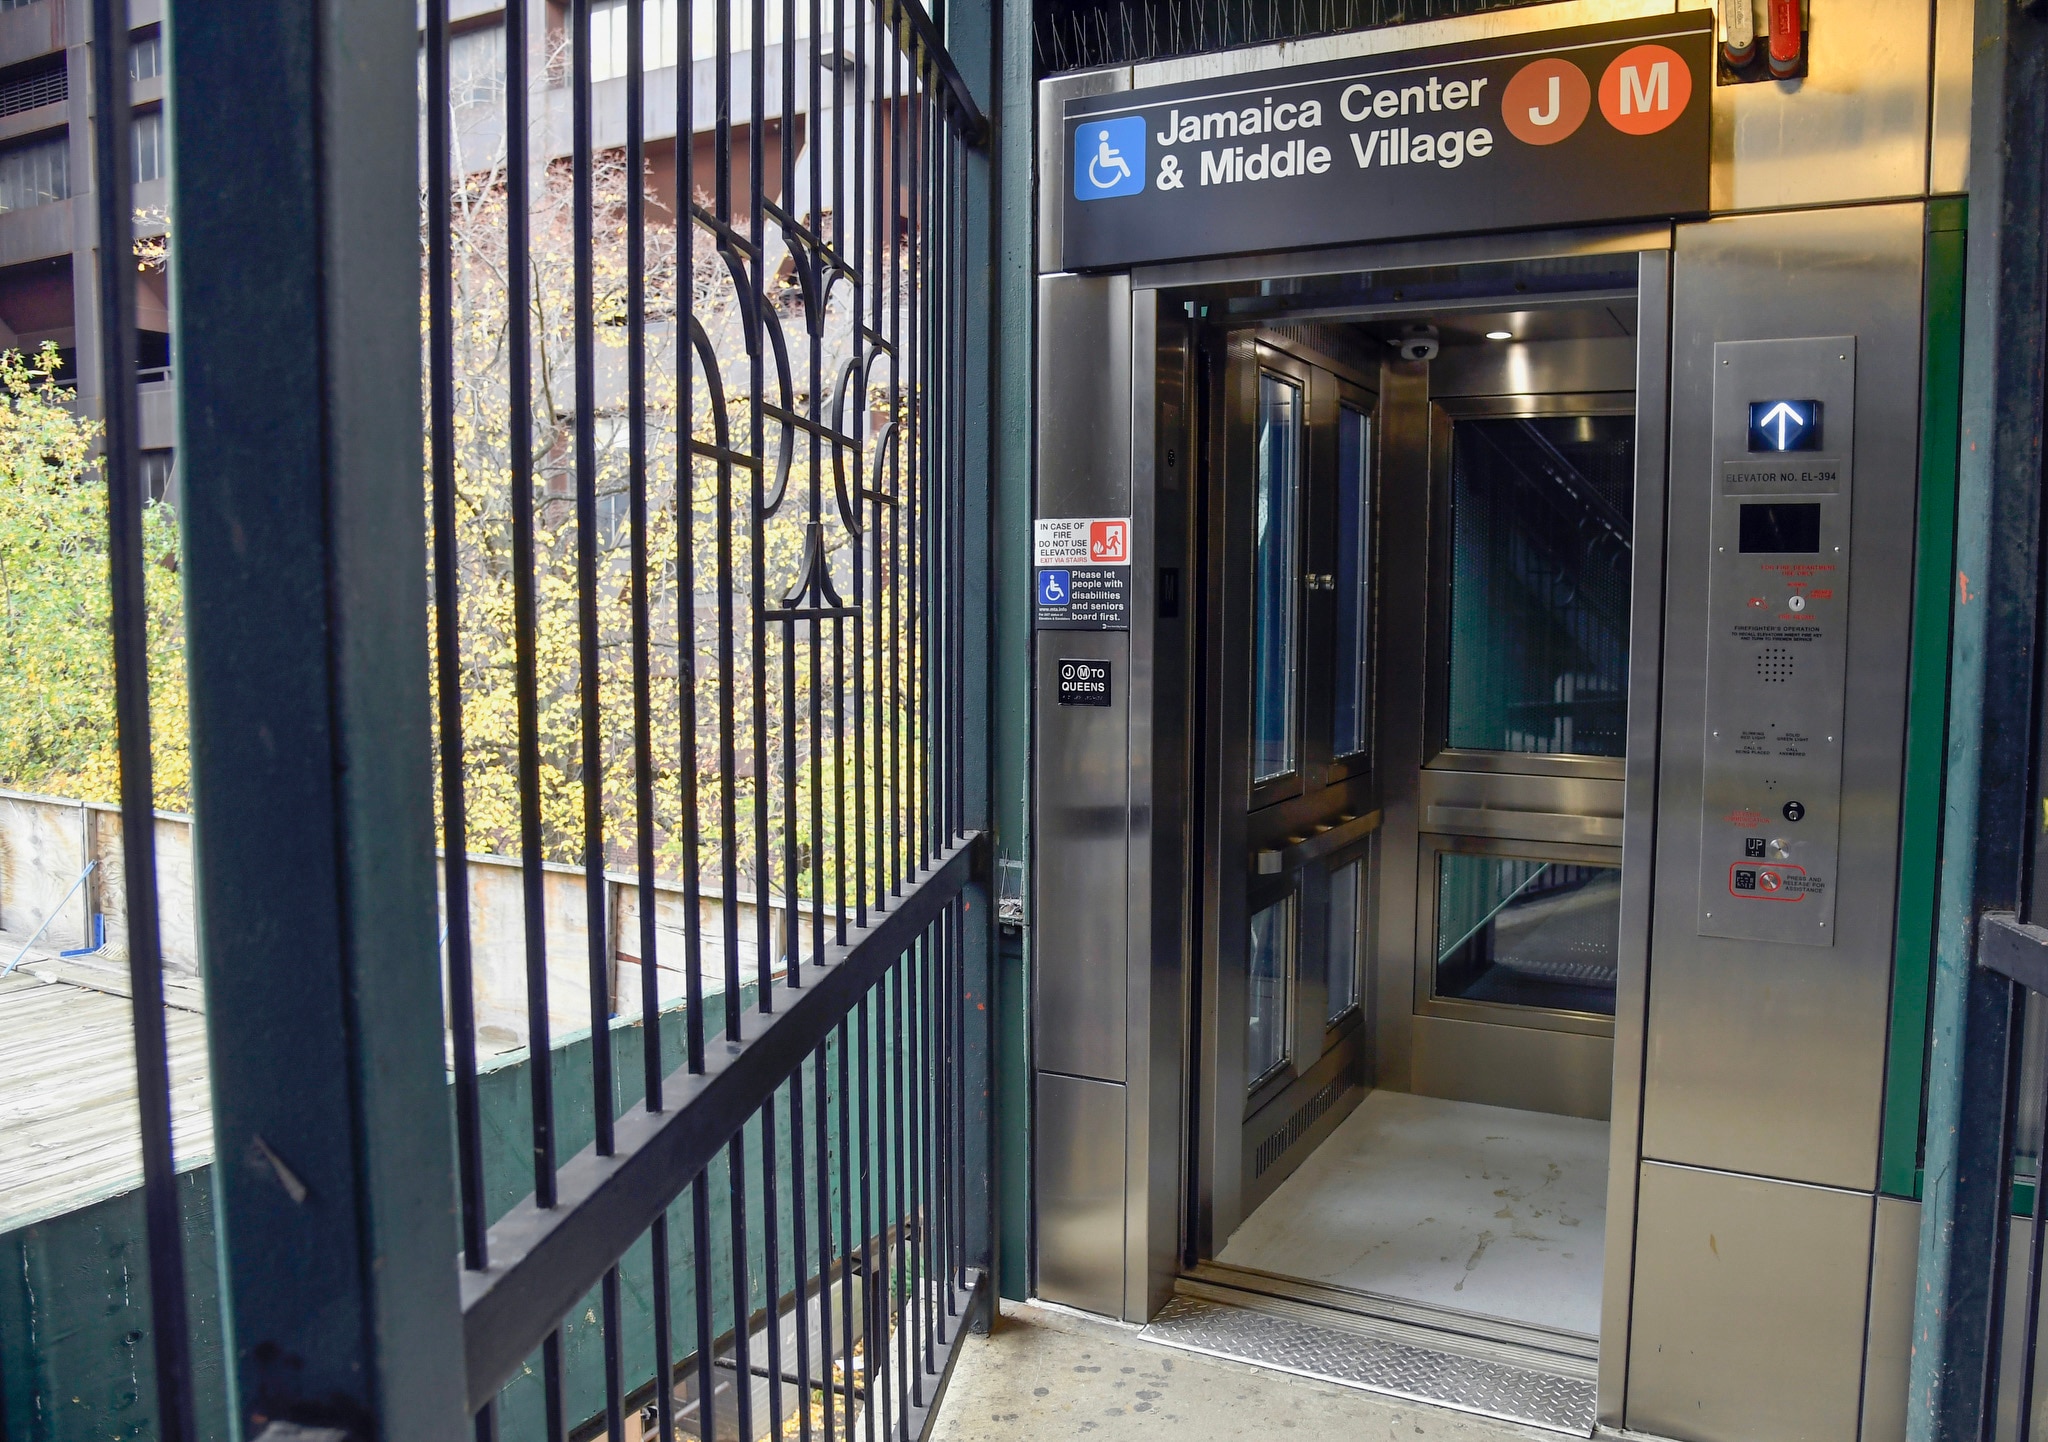 Replacement of three ADA elevators at the Flushing Av station on the J/M lines